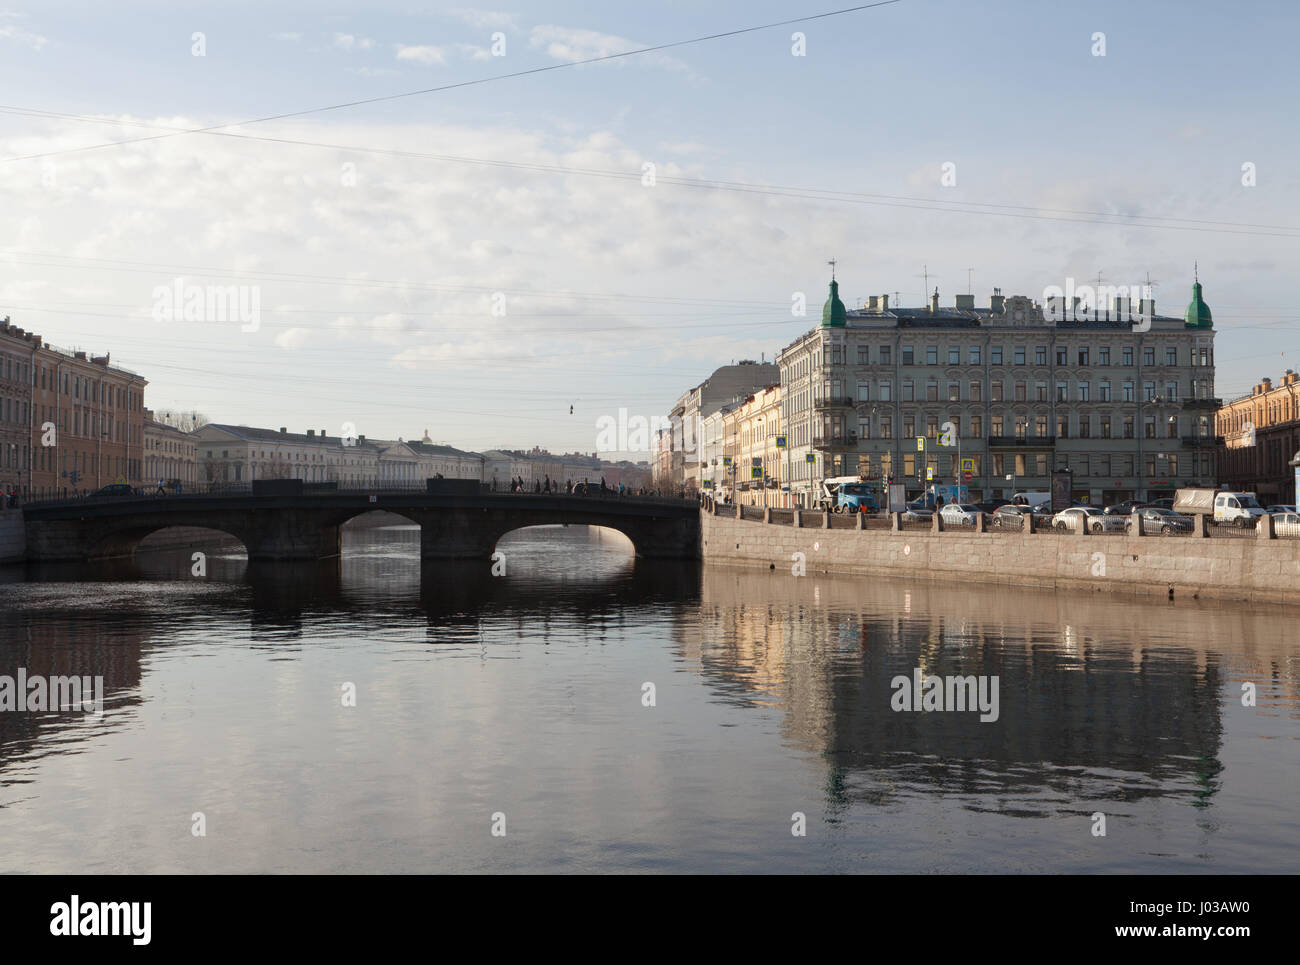 The Belinsky Bridge and Fontanka River at the morning, St. Petersburg, Russia. Stock Photo